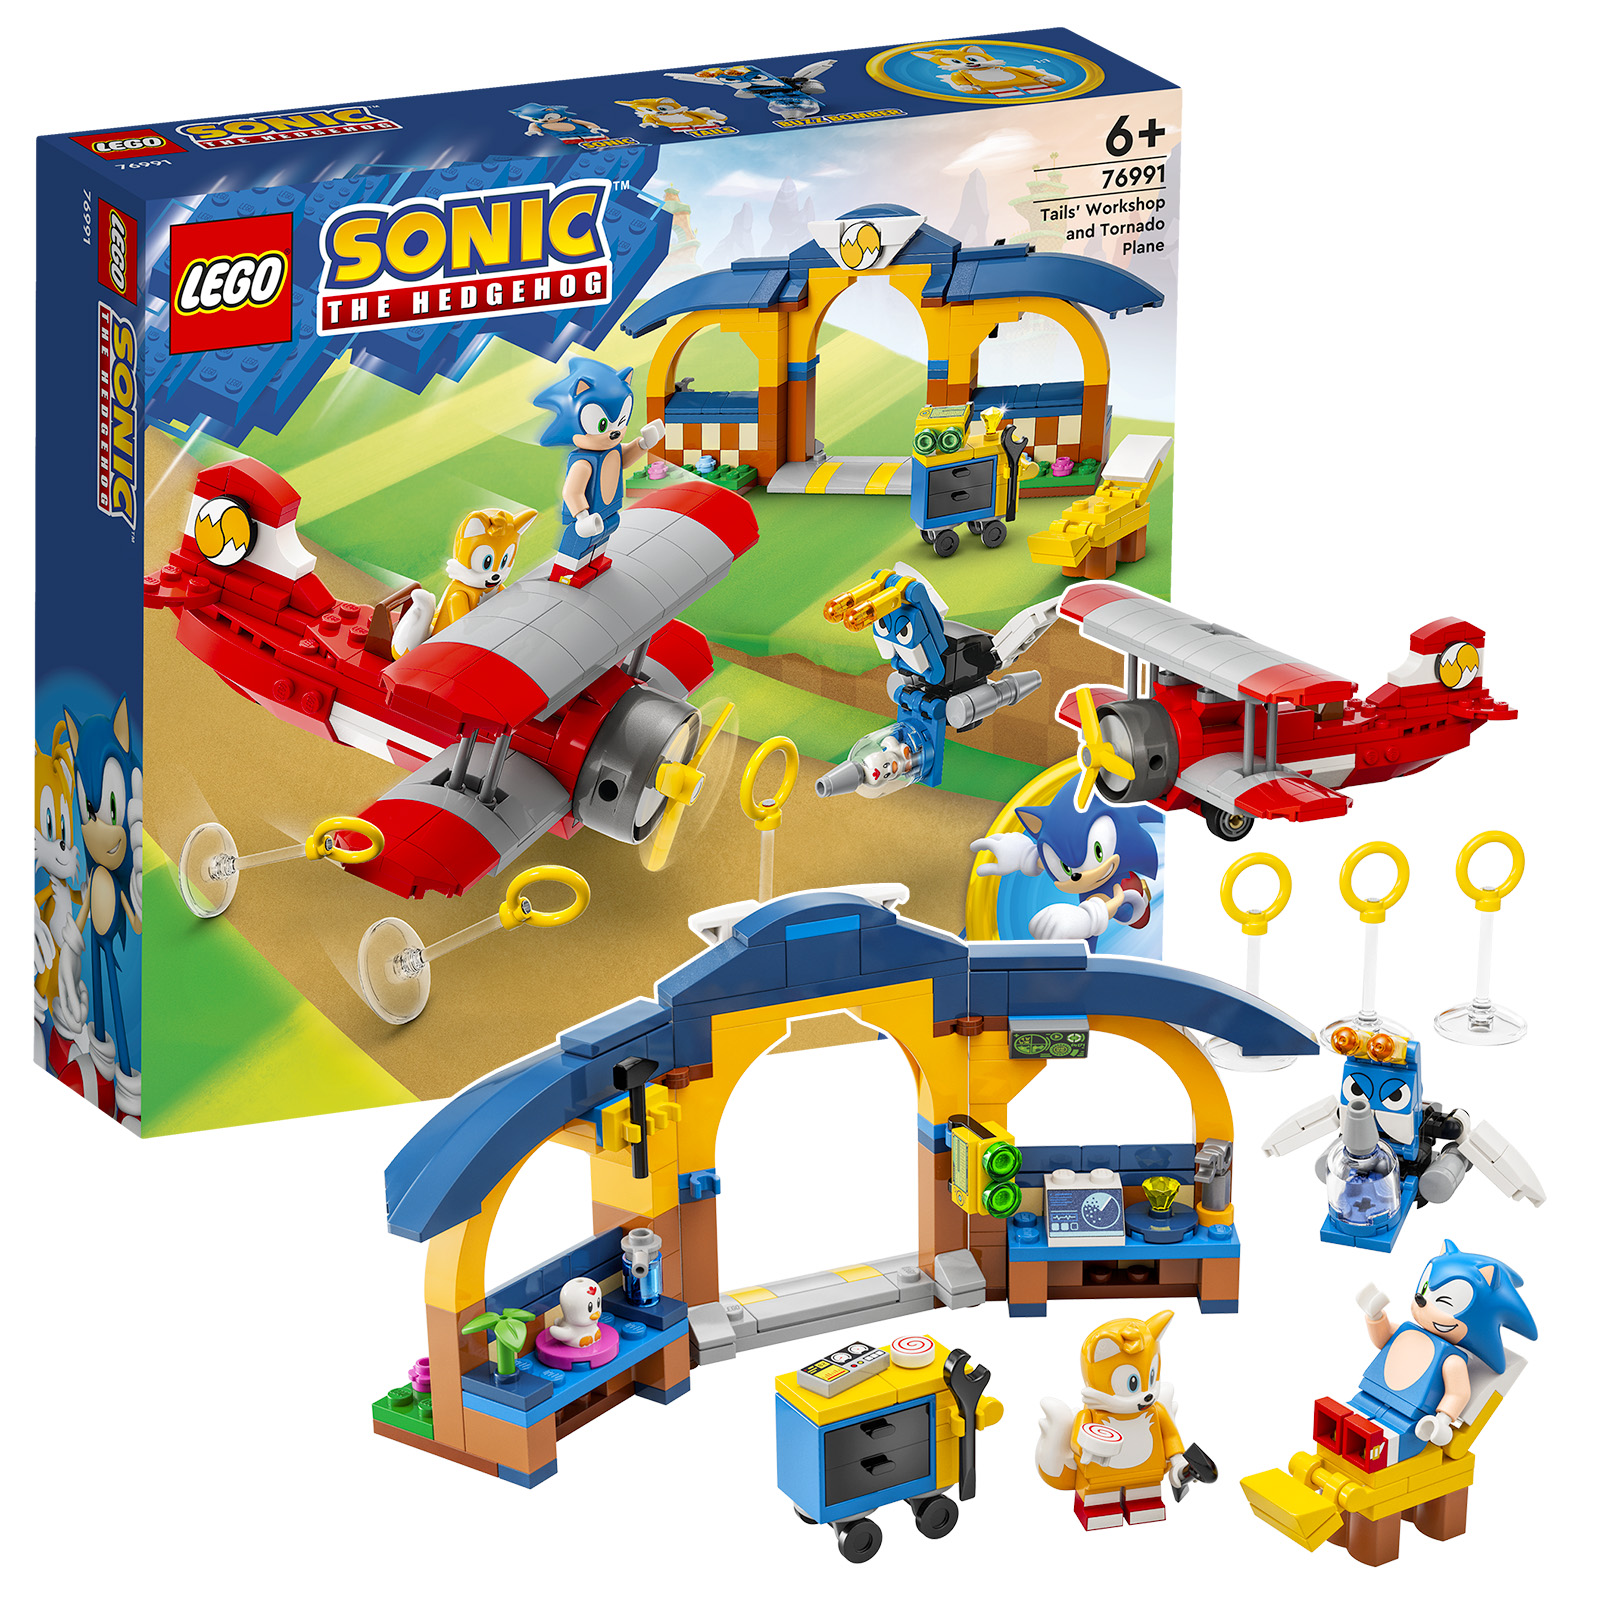 Lego's Sonic the Hedgehog set release date and price announced - Polygon